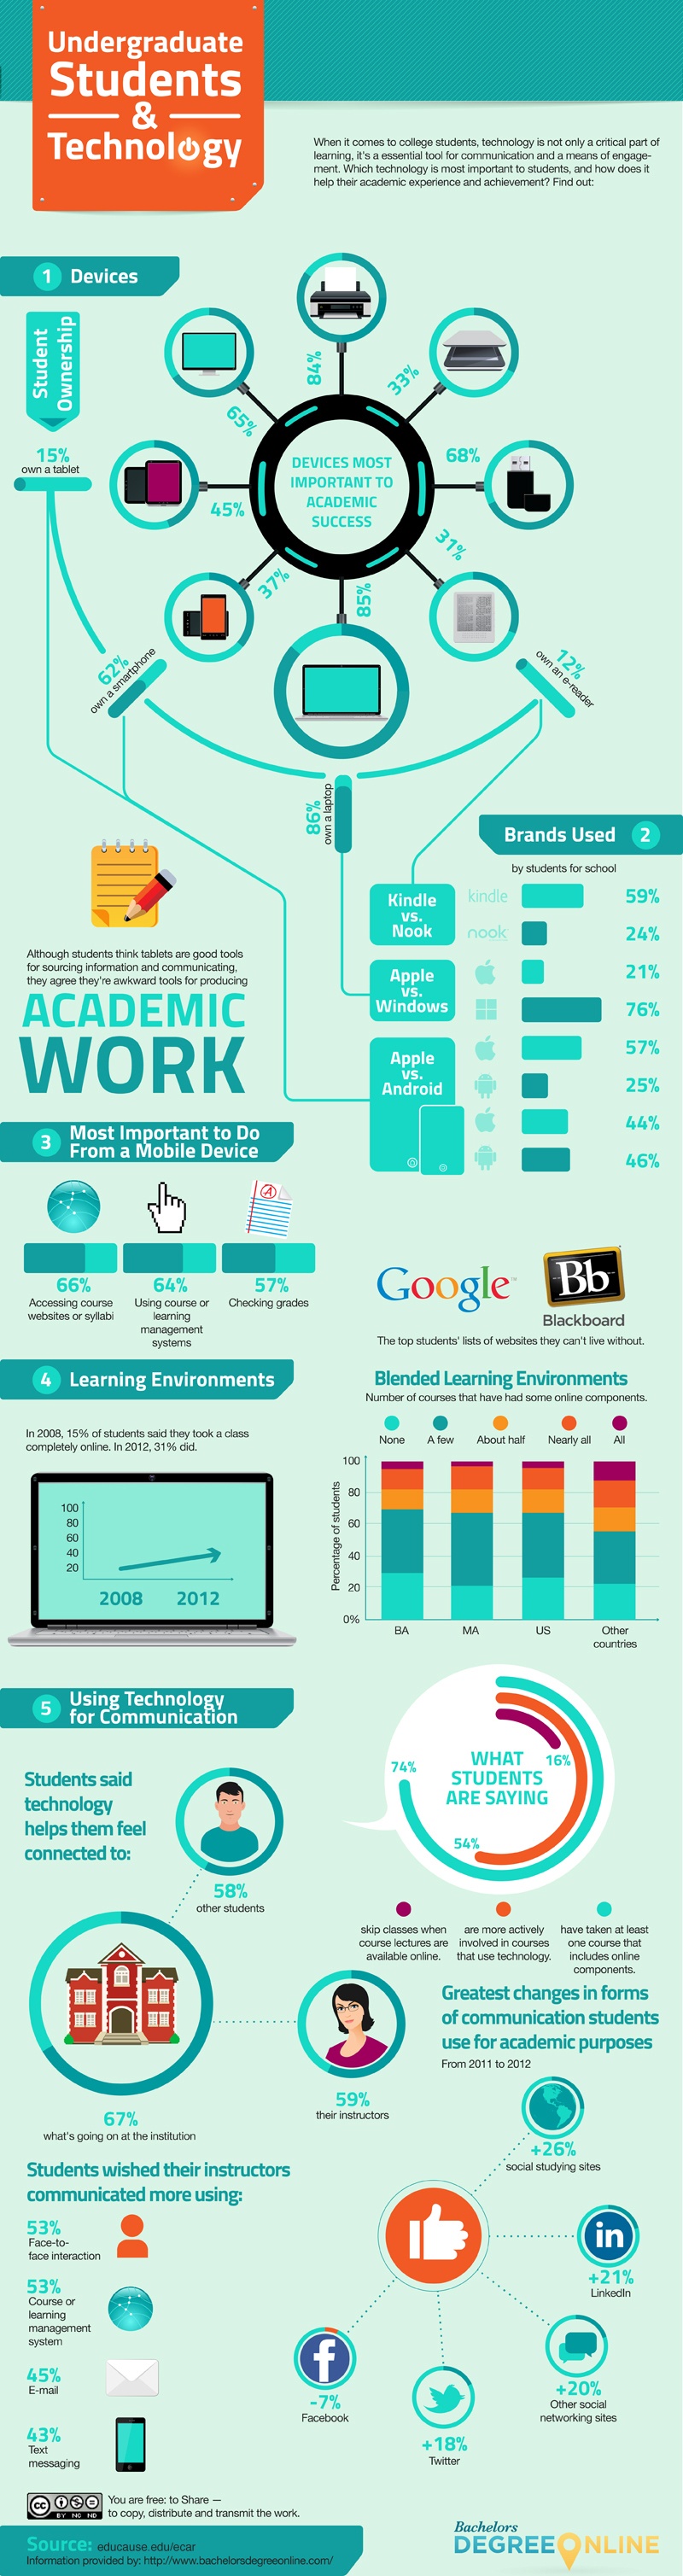 Undergraduate Students and Educational Technology Infographic